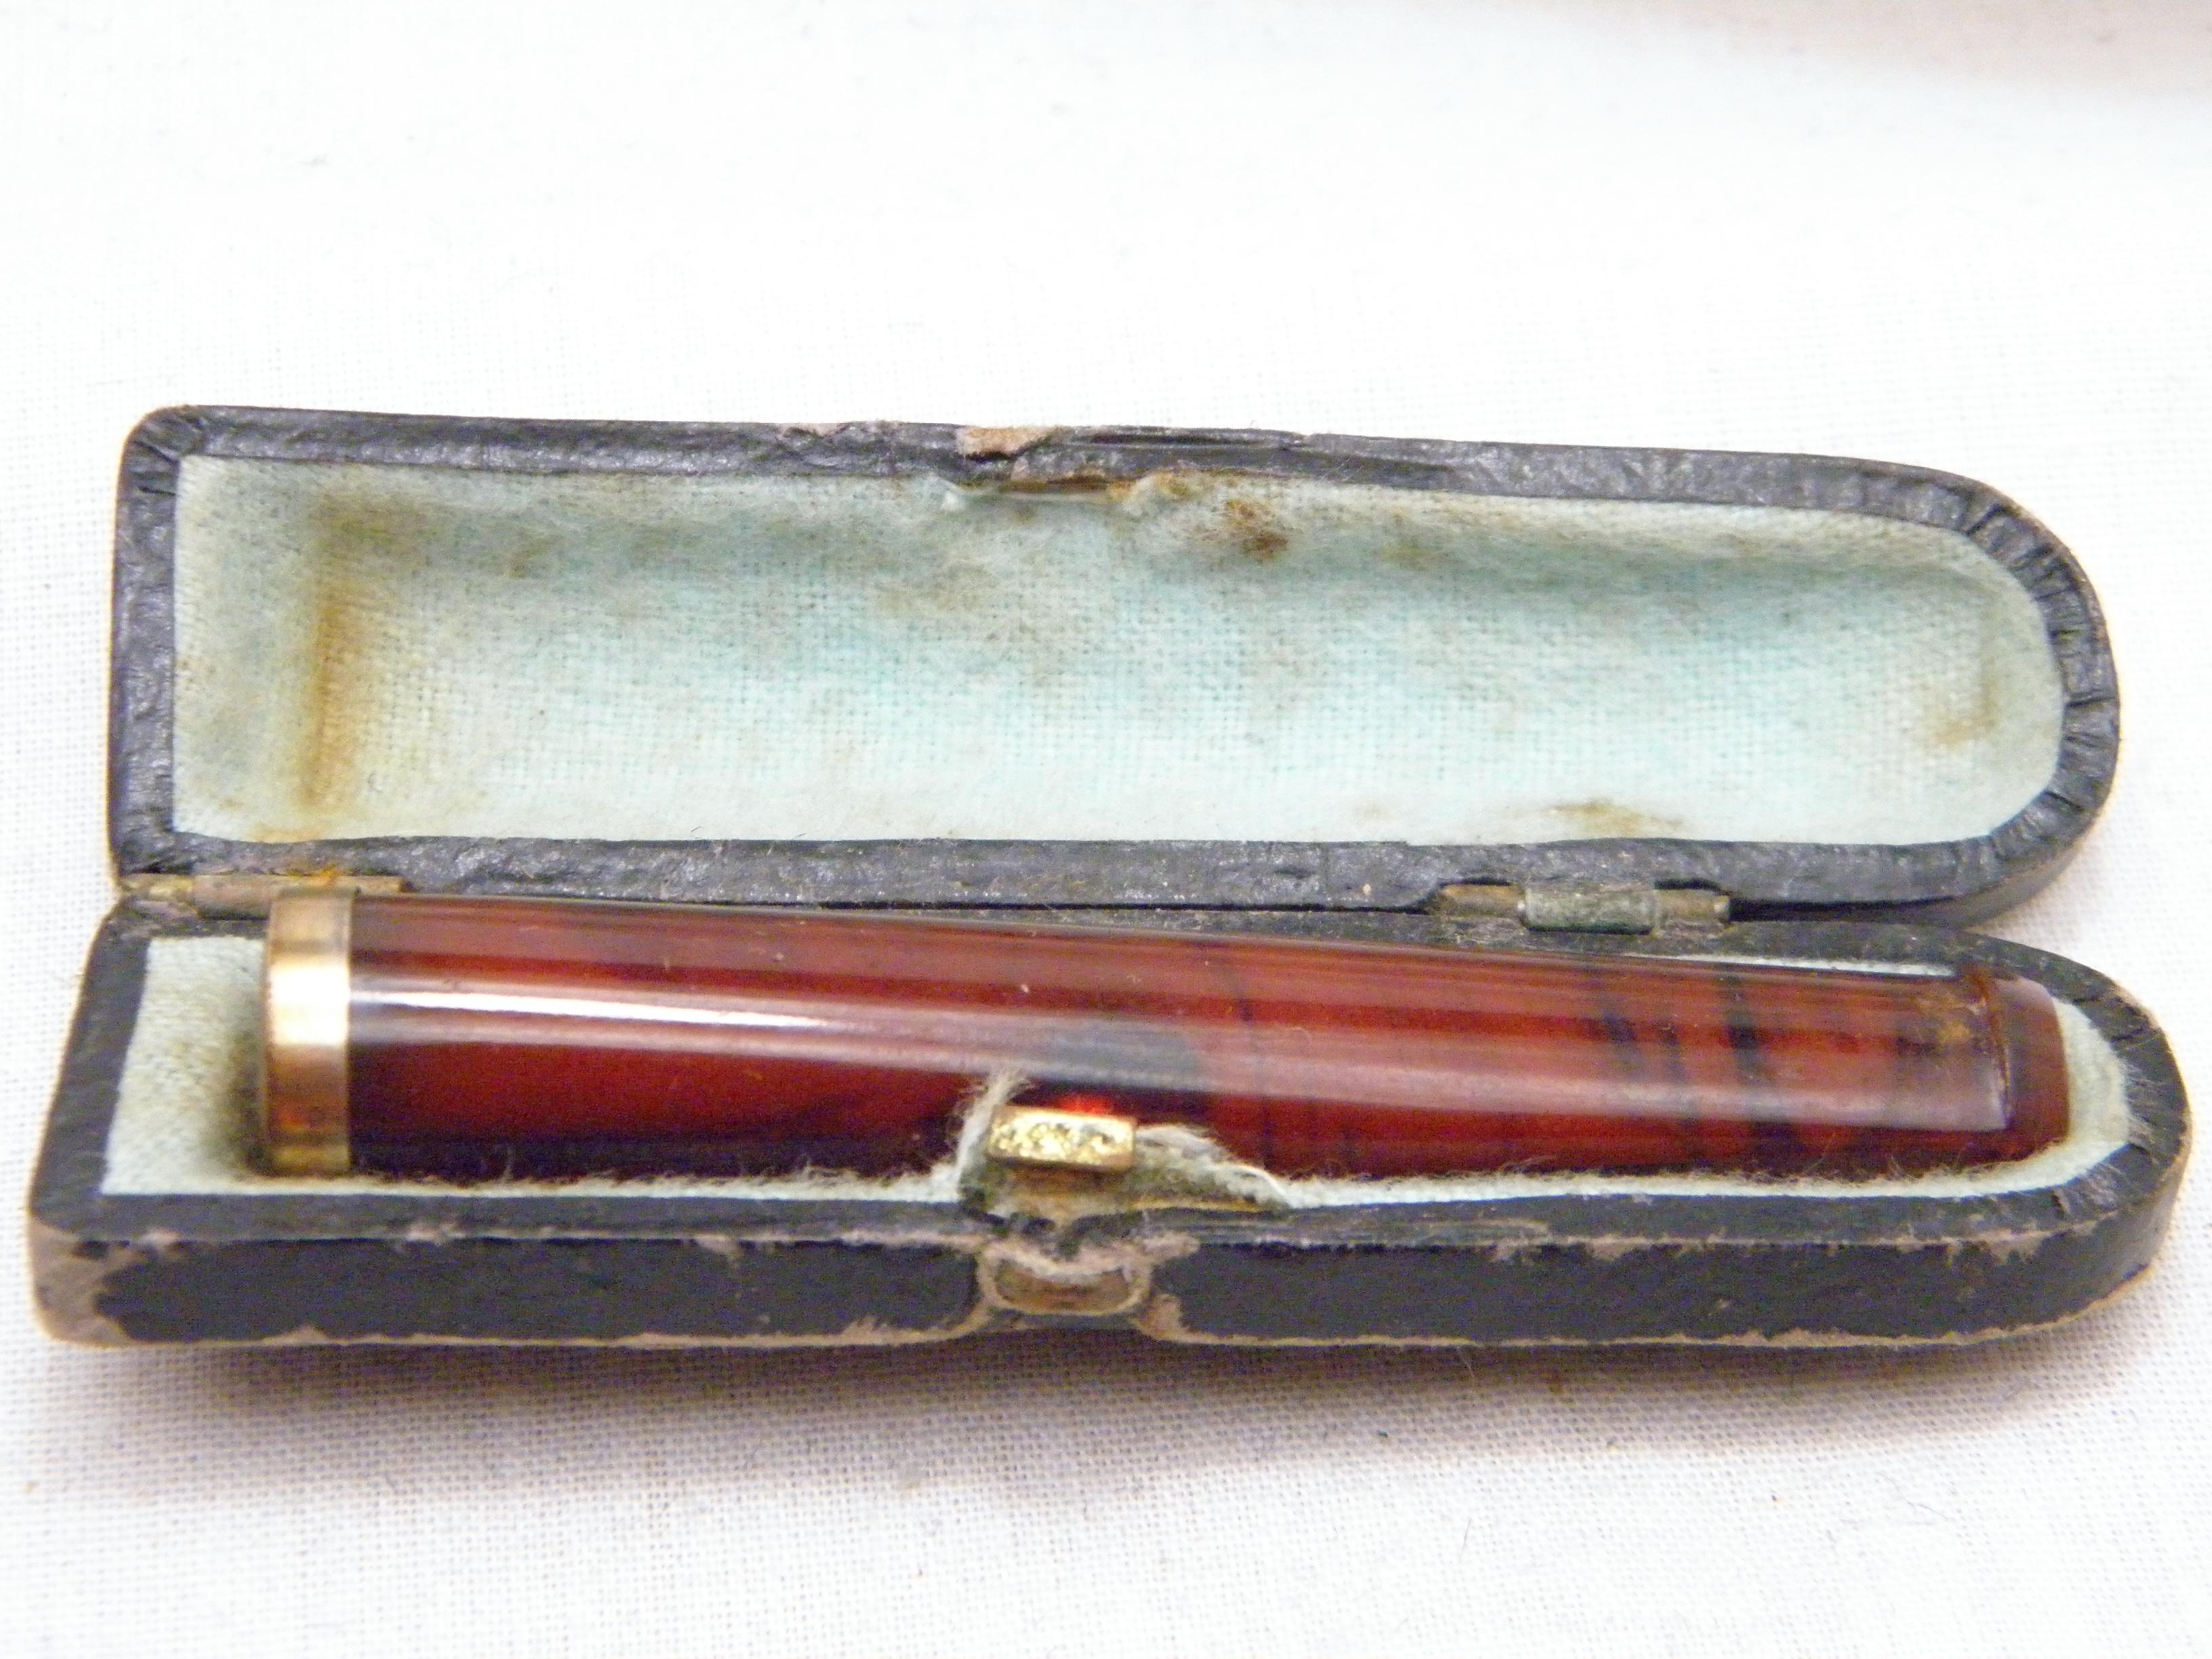 If you have landed on this page then you have an eye for beauty.

On offer is this gorgeous

15CT SOLID GOLD CHERRY AMBER CIGAR / CHEROOT HOLDER

DETAILS
Material: 15ct (625/000) Solid Rose Gold collar and resin designed to look like cherry